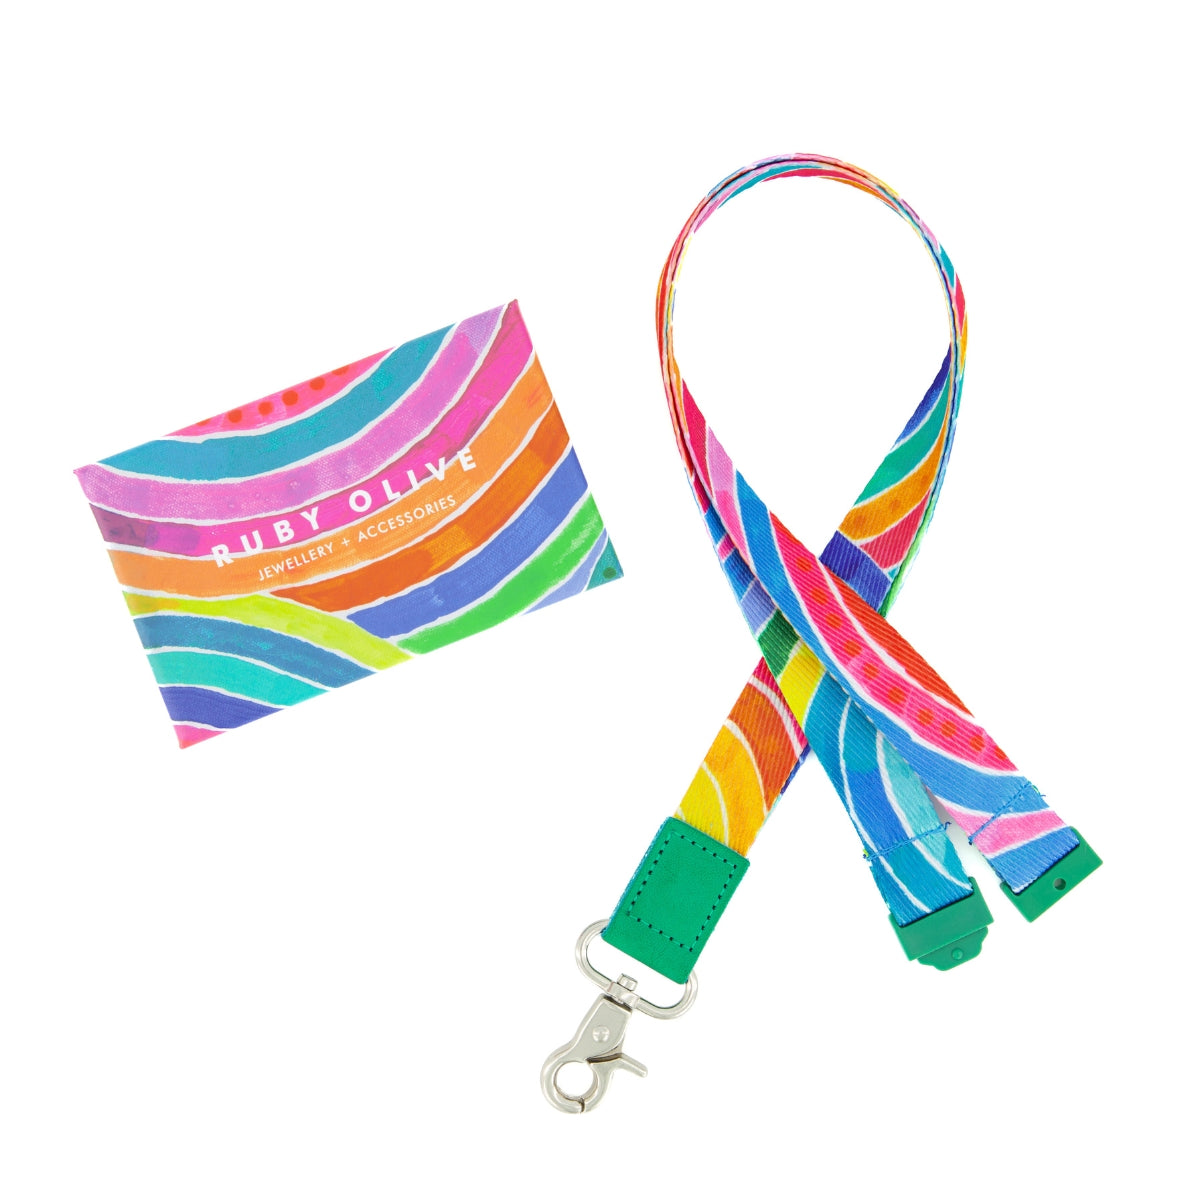 RO x Lordy Dordie Rainbow Lanyard (2 Colours With Safety Clasp Option)